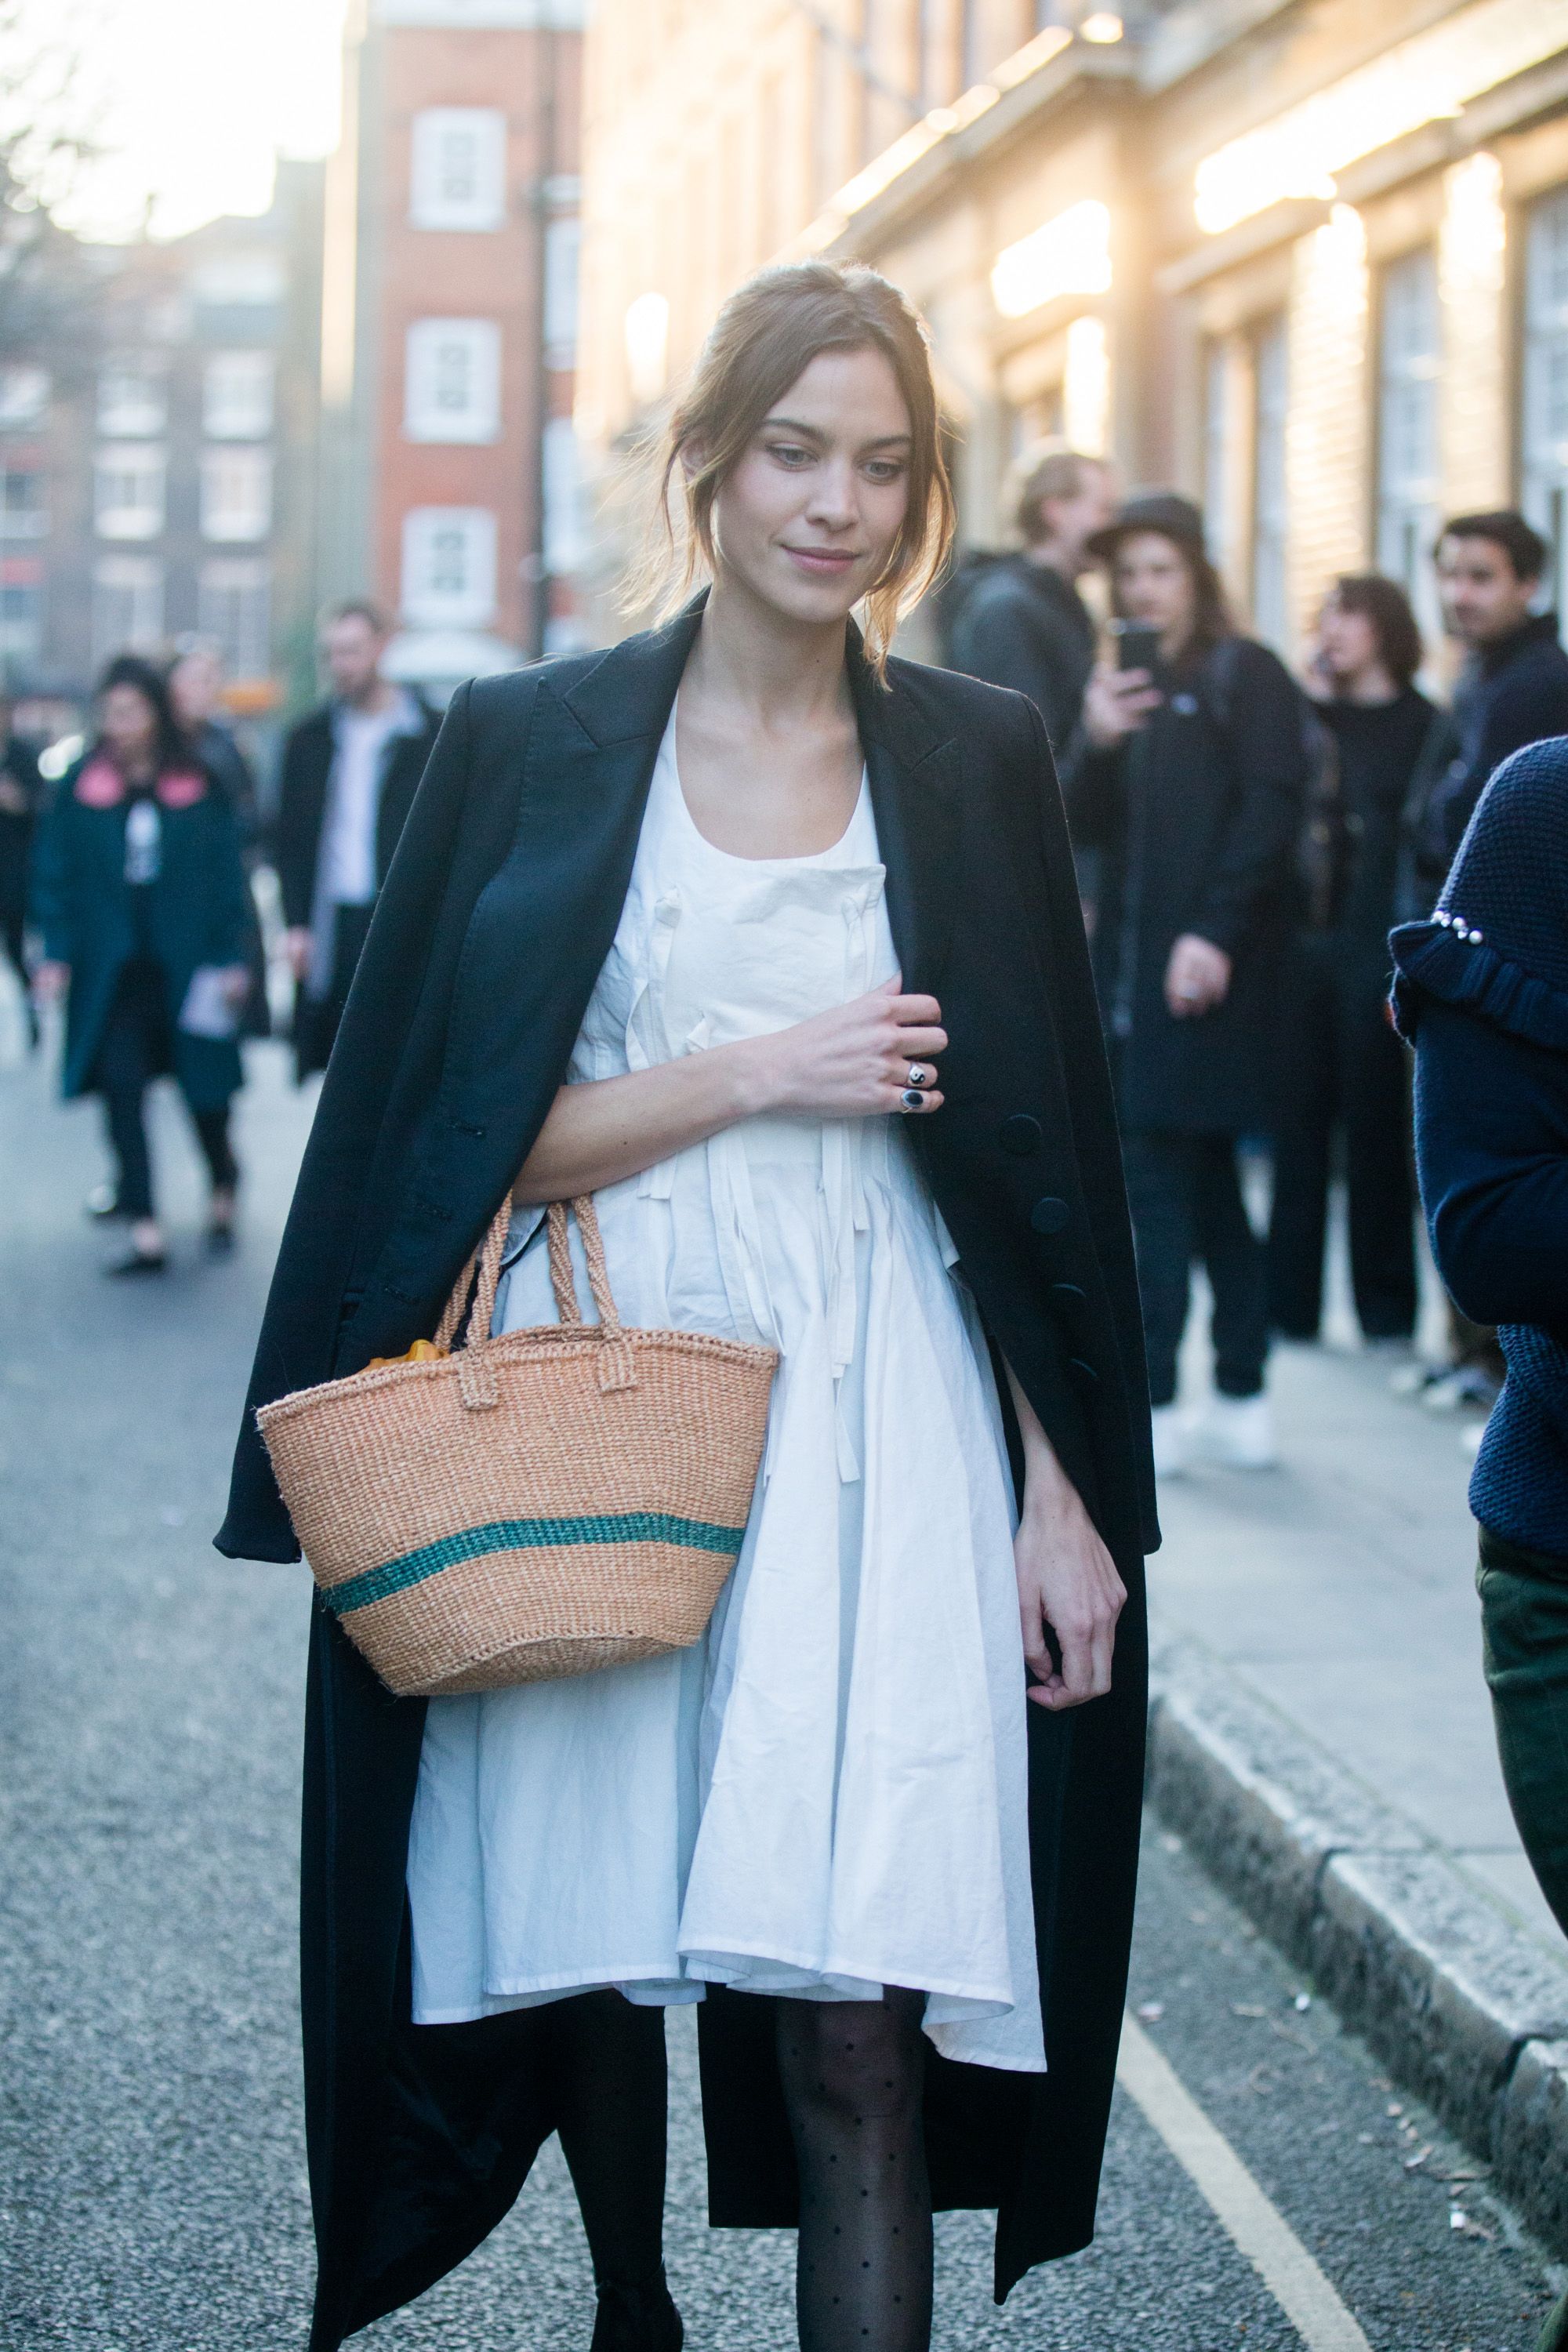 Alexa Chung's eclectic rainy-day style: Get the look